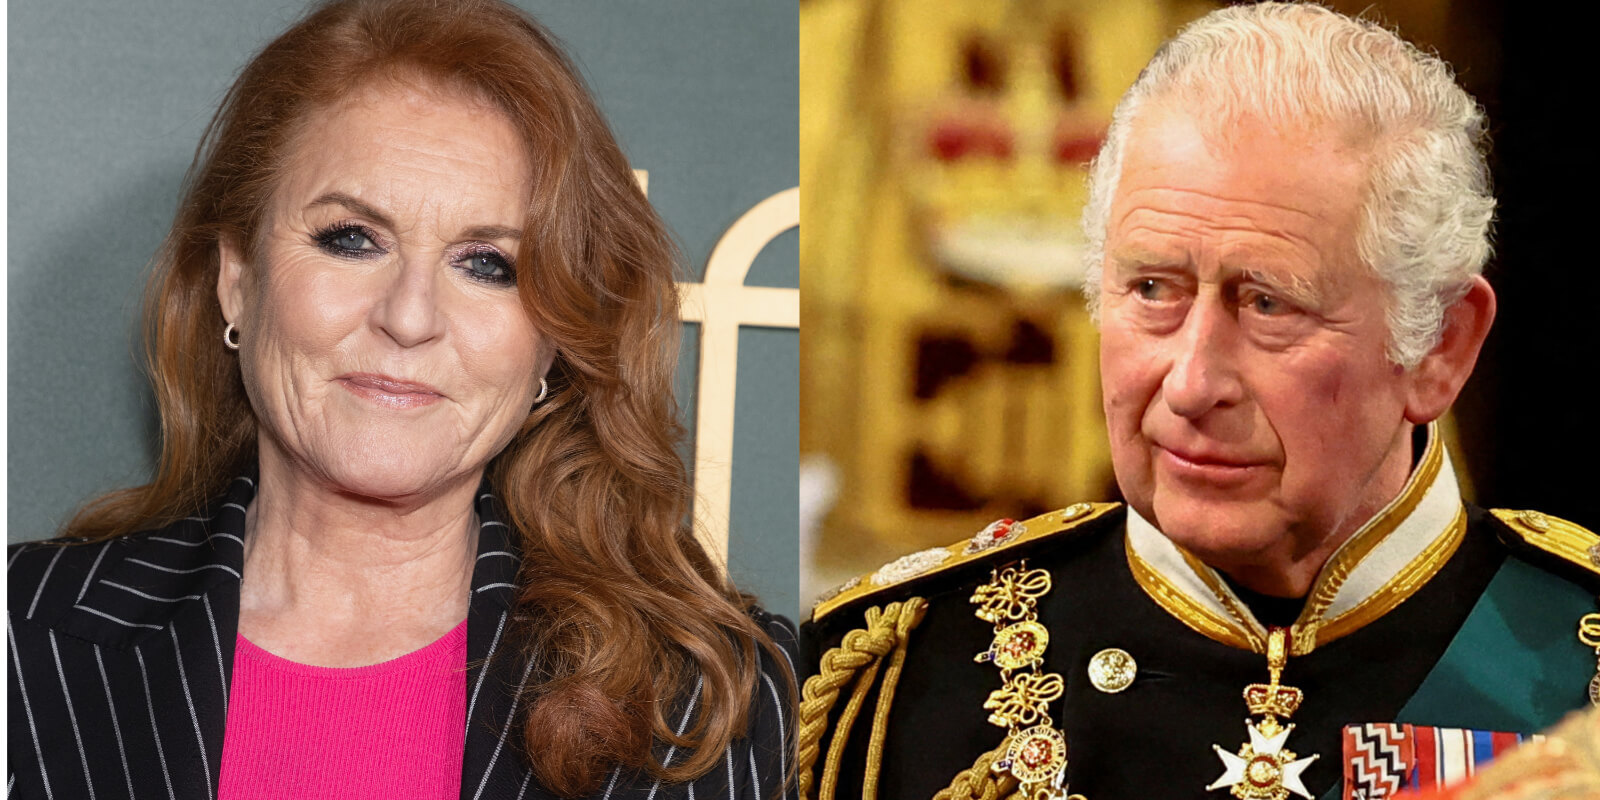 Sarah Ferguson was not invited to King Charles' coronation but will attend a key event of the weekend honoring the monarch.